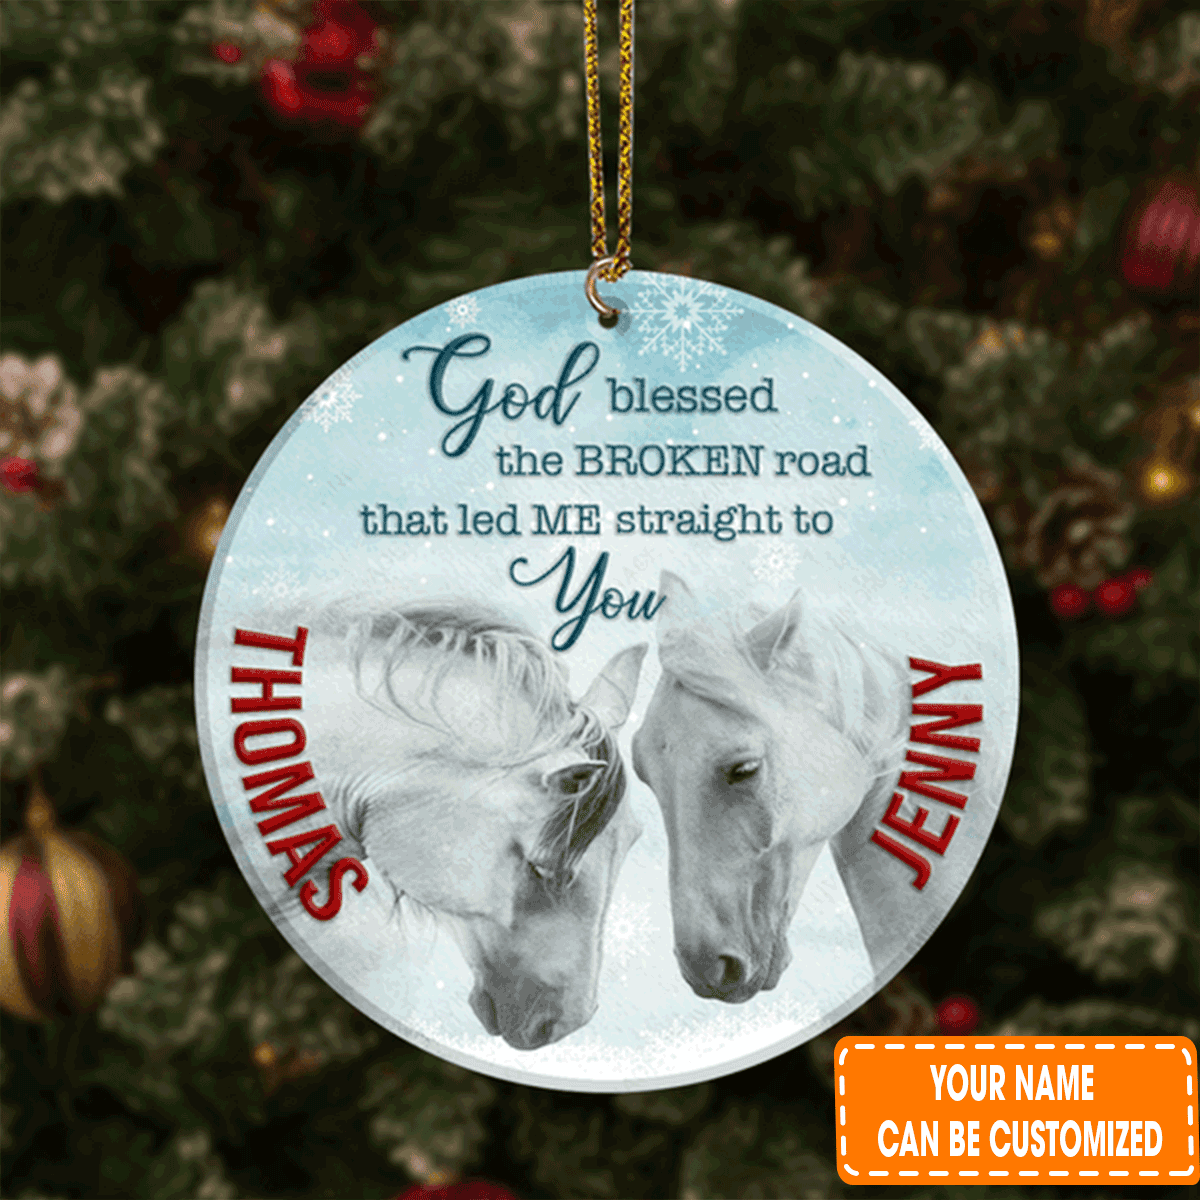 Custom Jesus Acrylic Ornament, Personalized White Horse Couple Snow God Blessed Acrylic Ornament For Christian, Holiday Decor